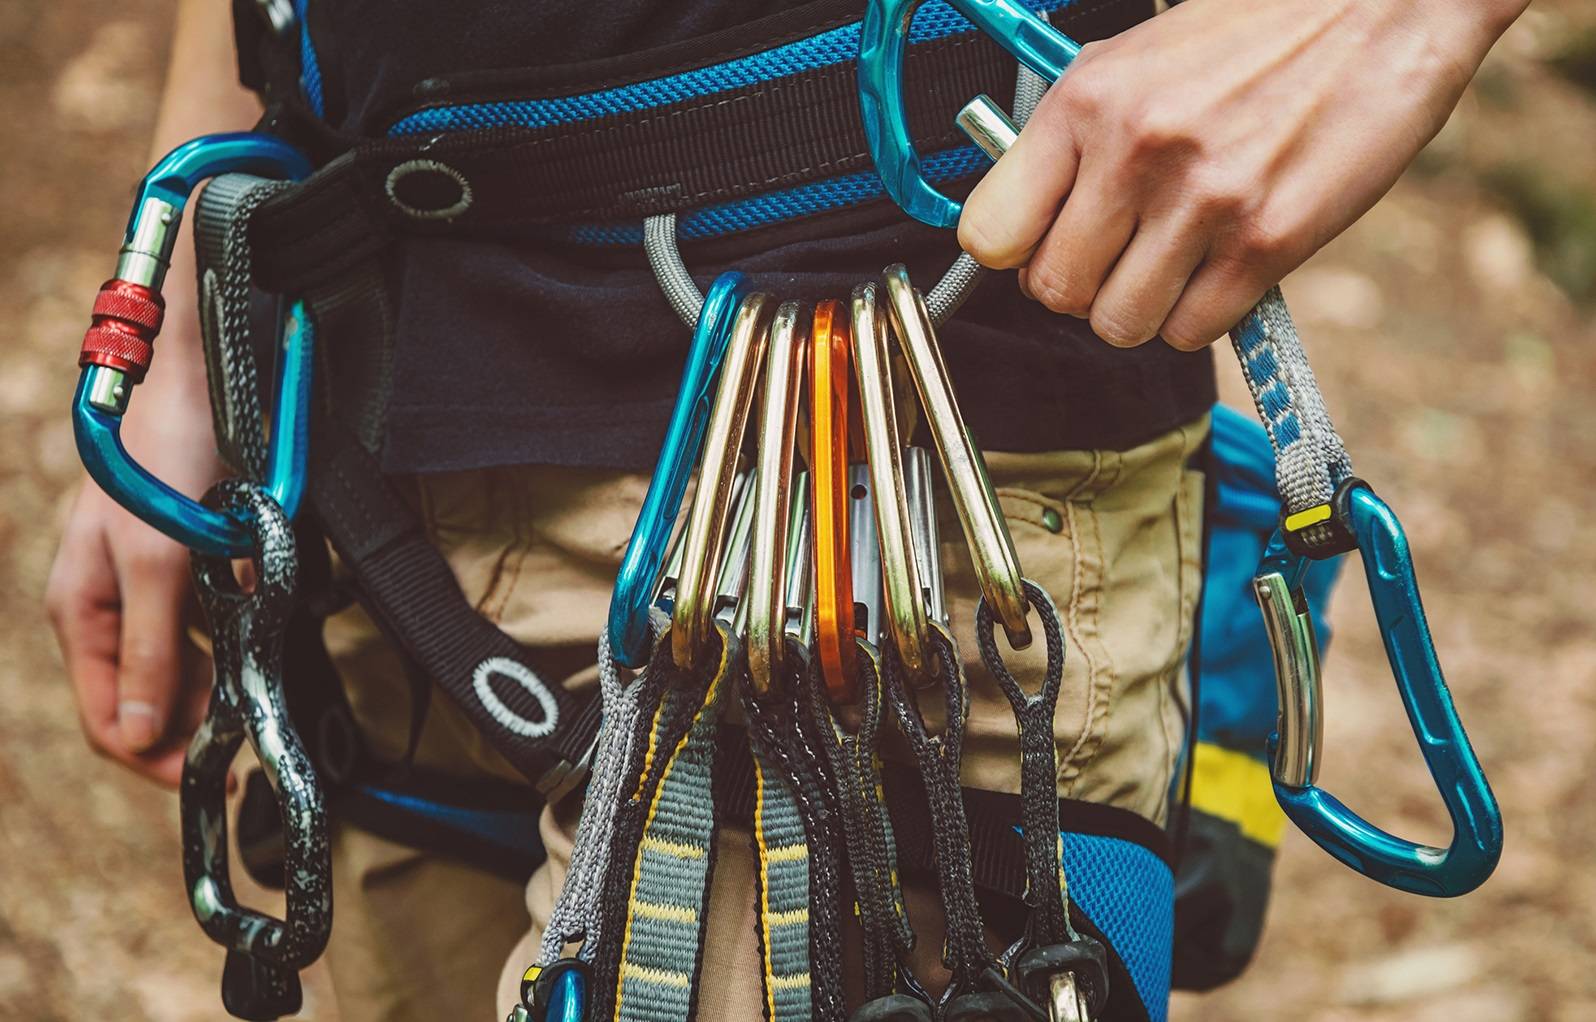 Buying Climbing Gear: What You Need to Know Before Buying Your Next ...